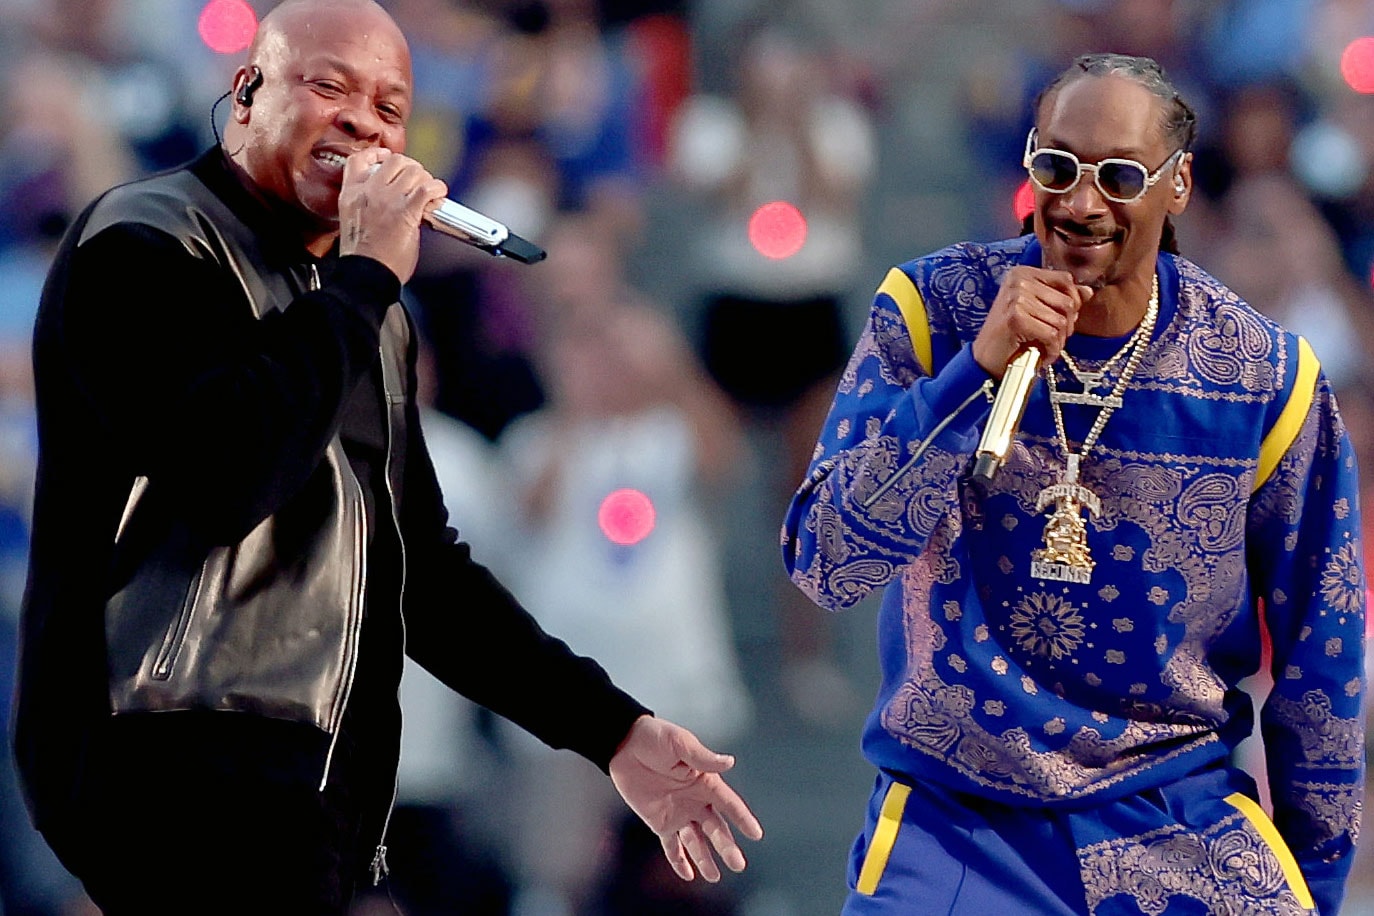 Snoop Dogg Announces New Album missionary produced by Dr. Dre